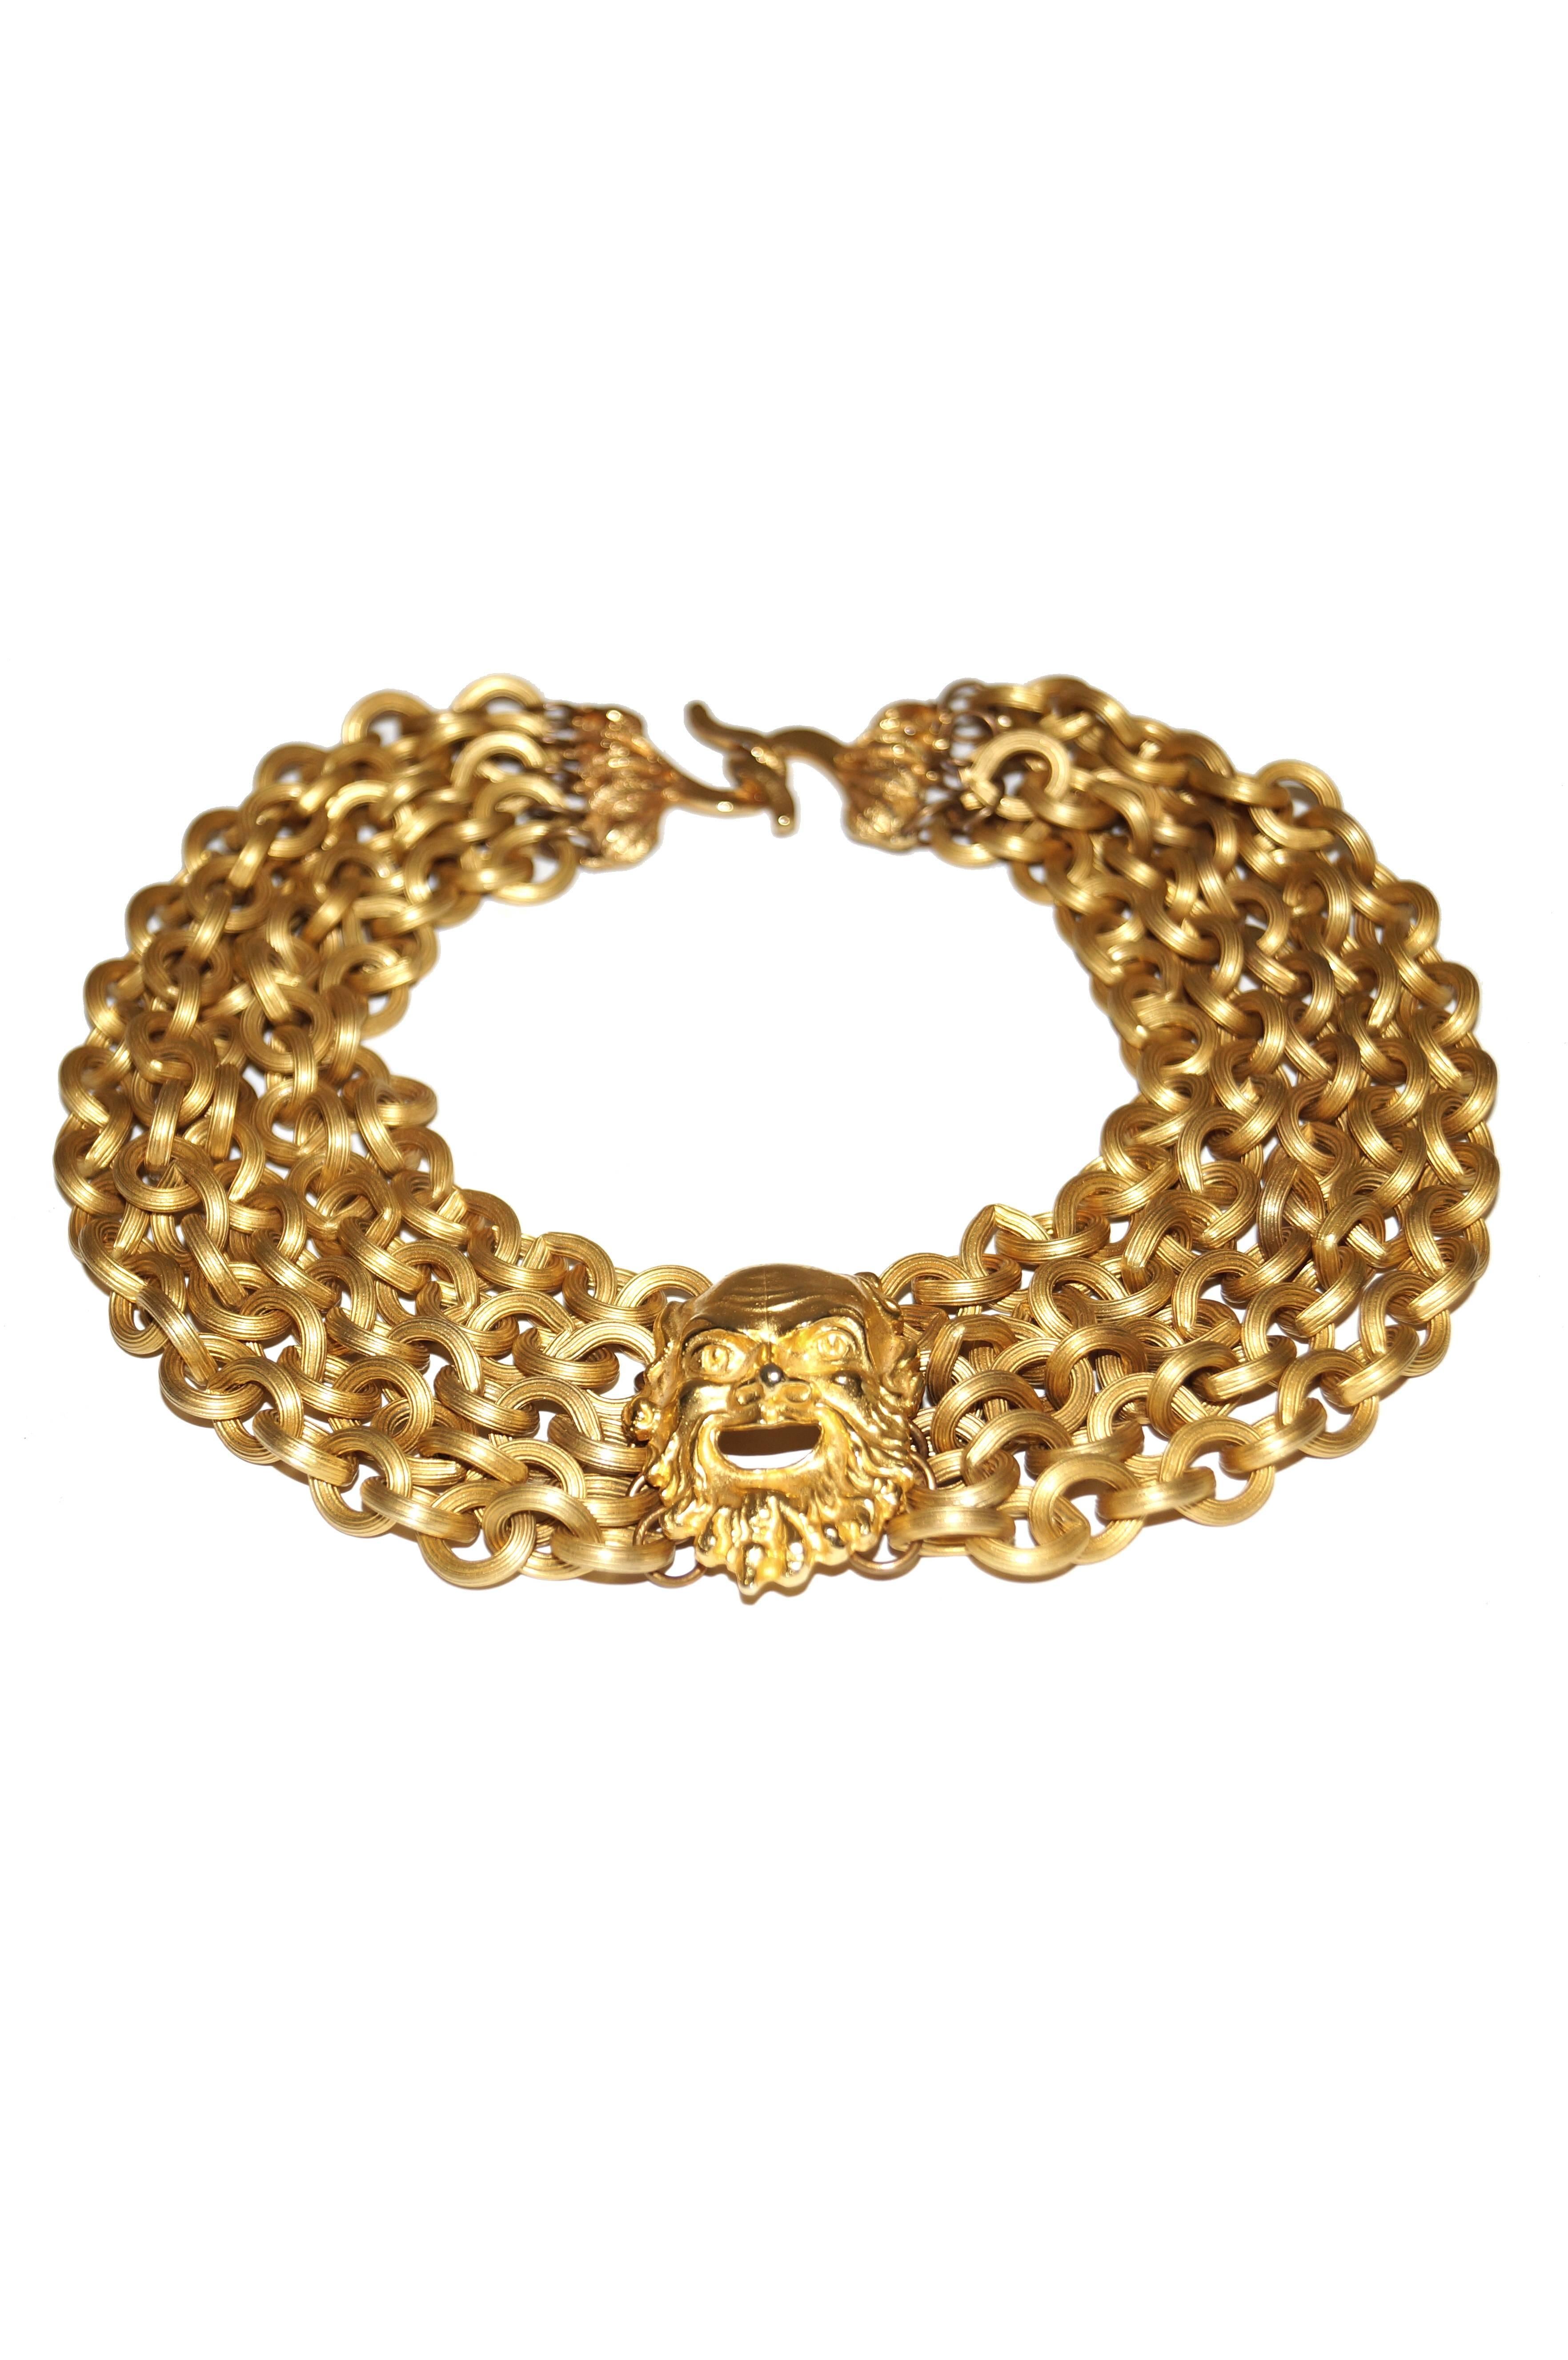 Prevost Gold Chain Zeus Head Choker, 1990s In Excellent Condition For Sale In Houston, TX